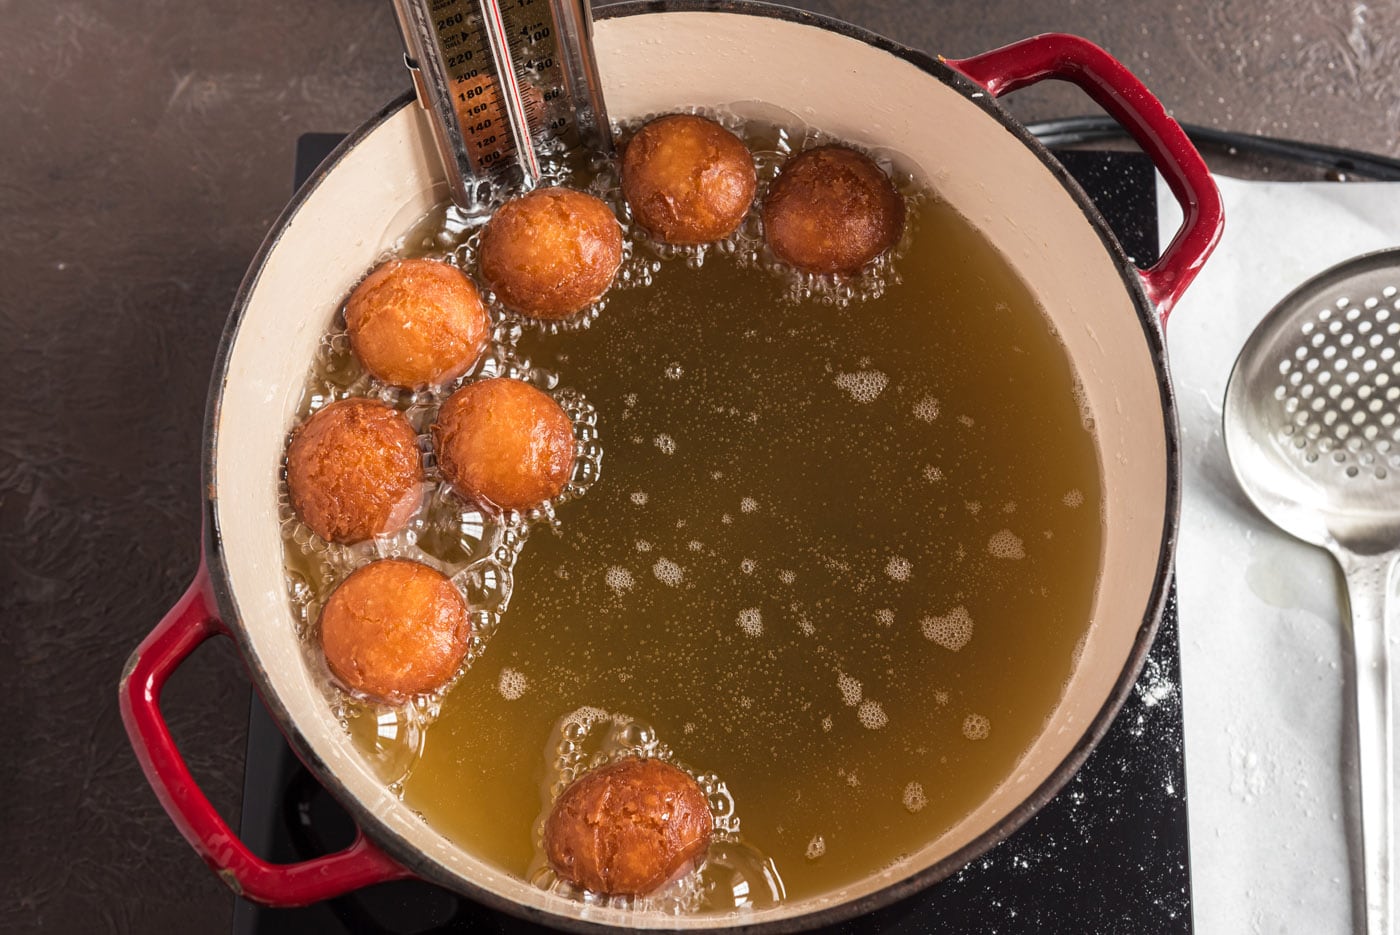 fried donut holes lifted out of oil